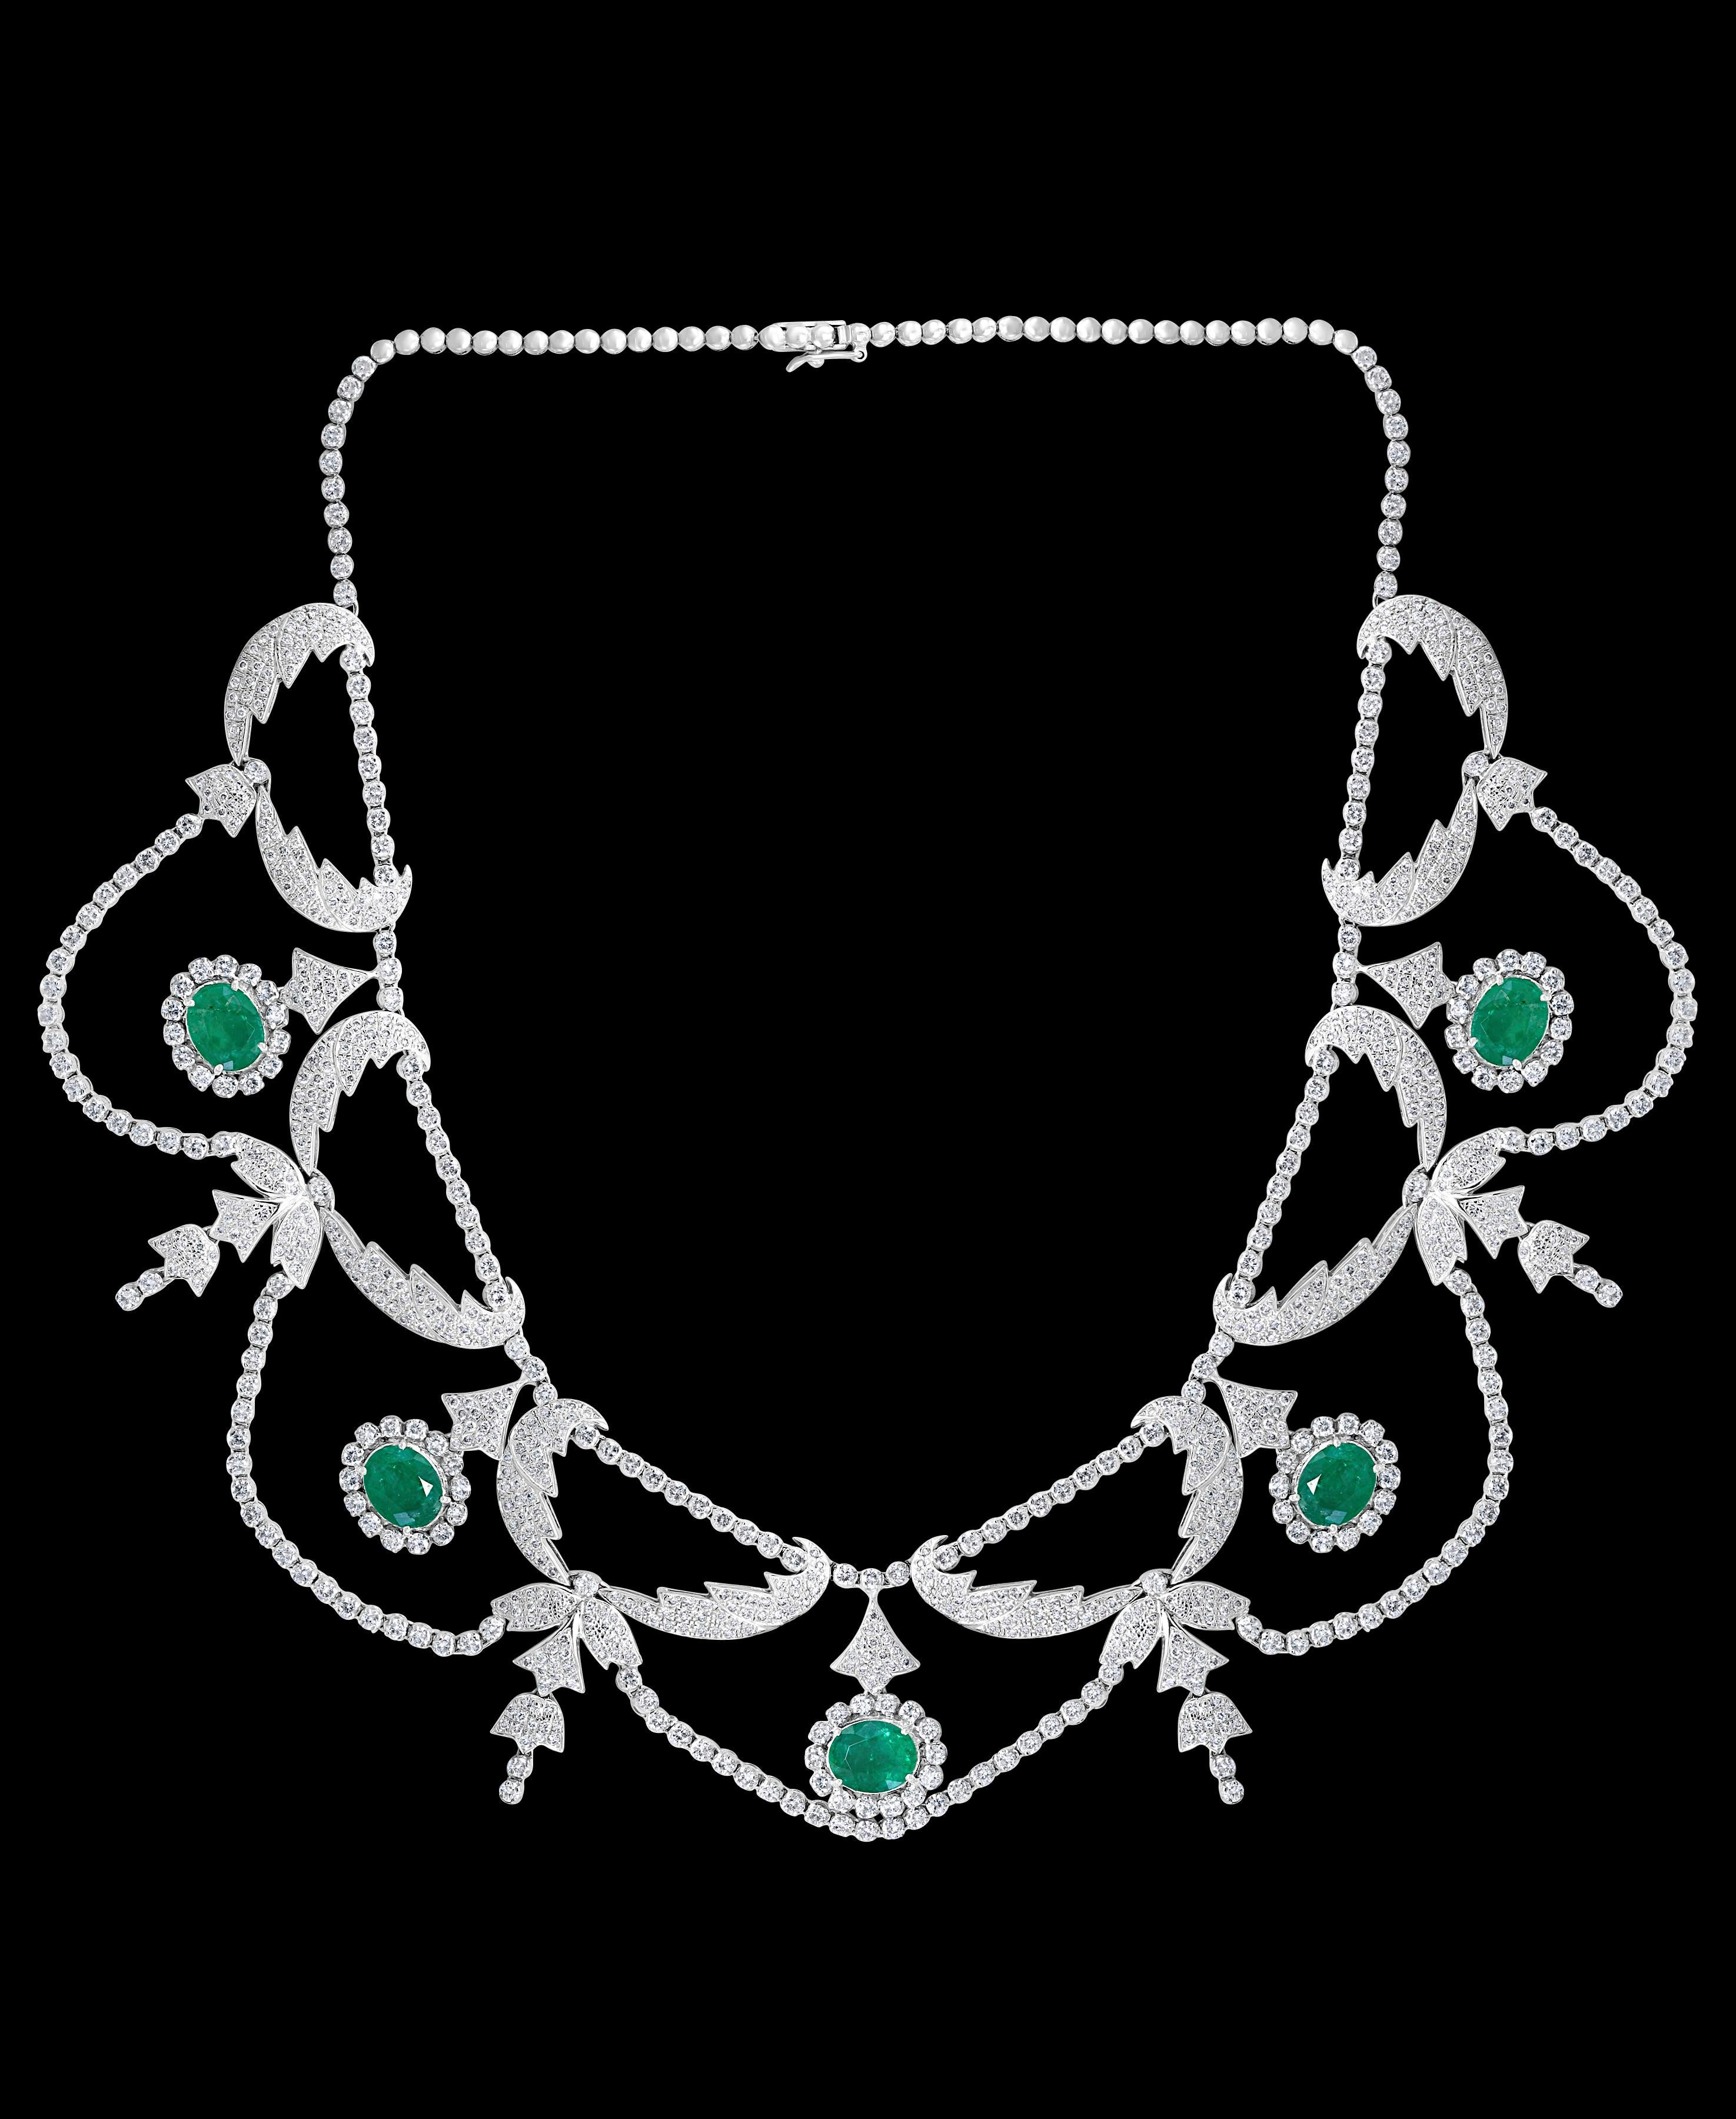 Oval Cut Oval Natural Zambian Emerald & Diamond Fringe Necklace and Earring Bridal Suite For Sale